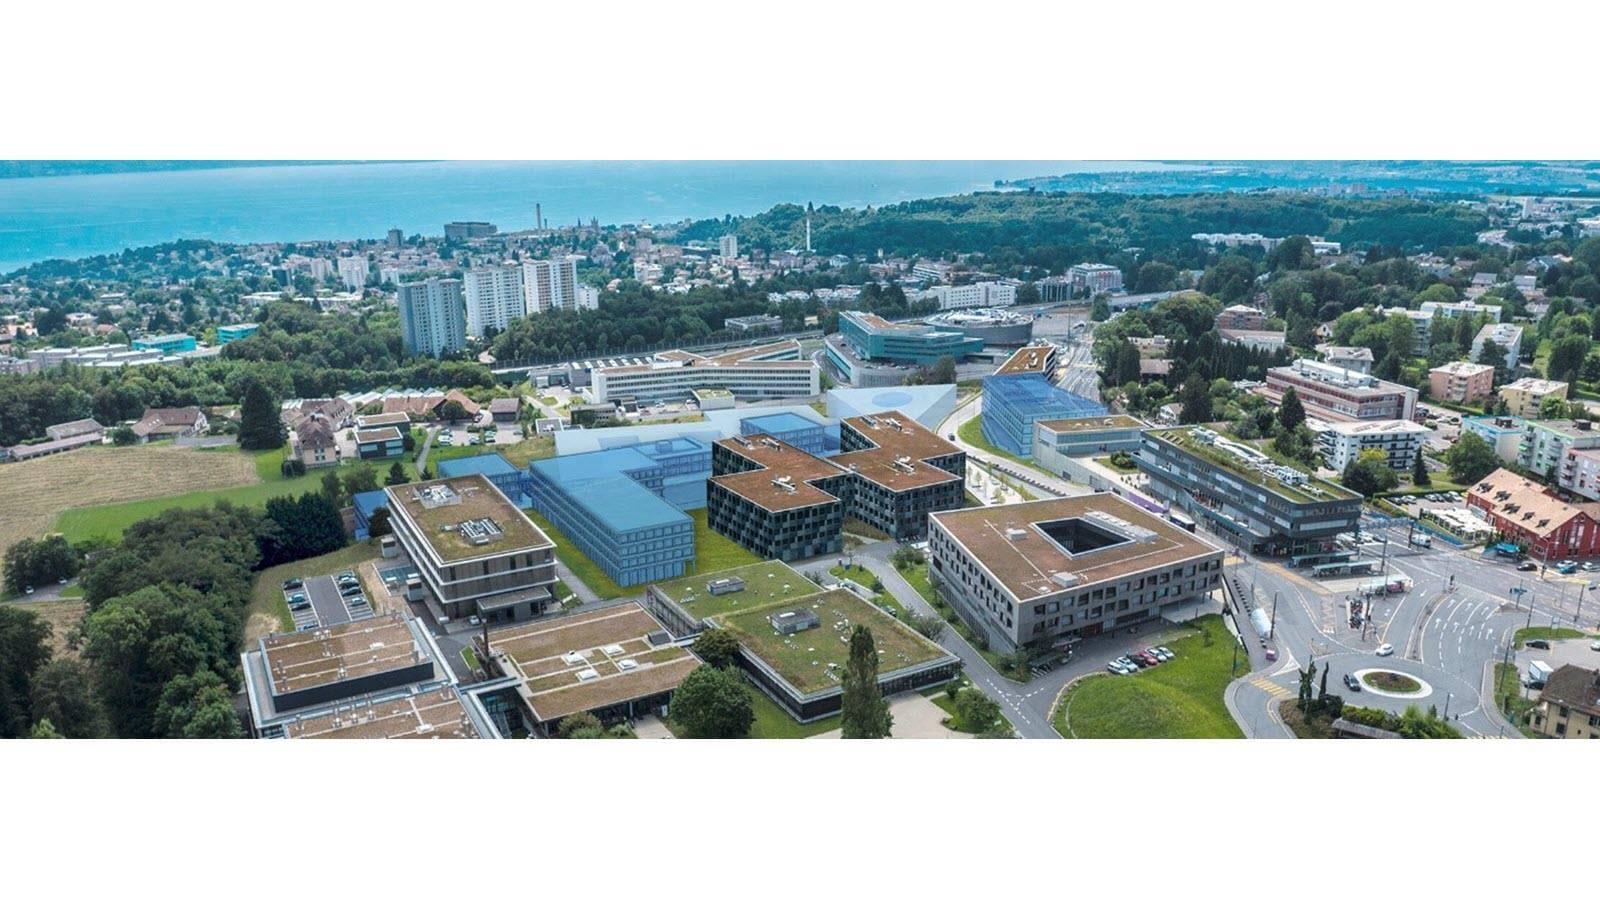 Aerial photograph of the Biopole campus in Switzerland